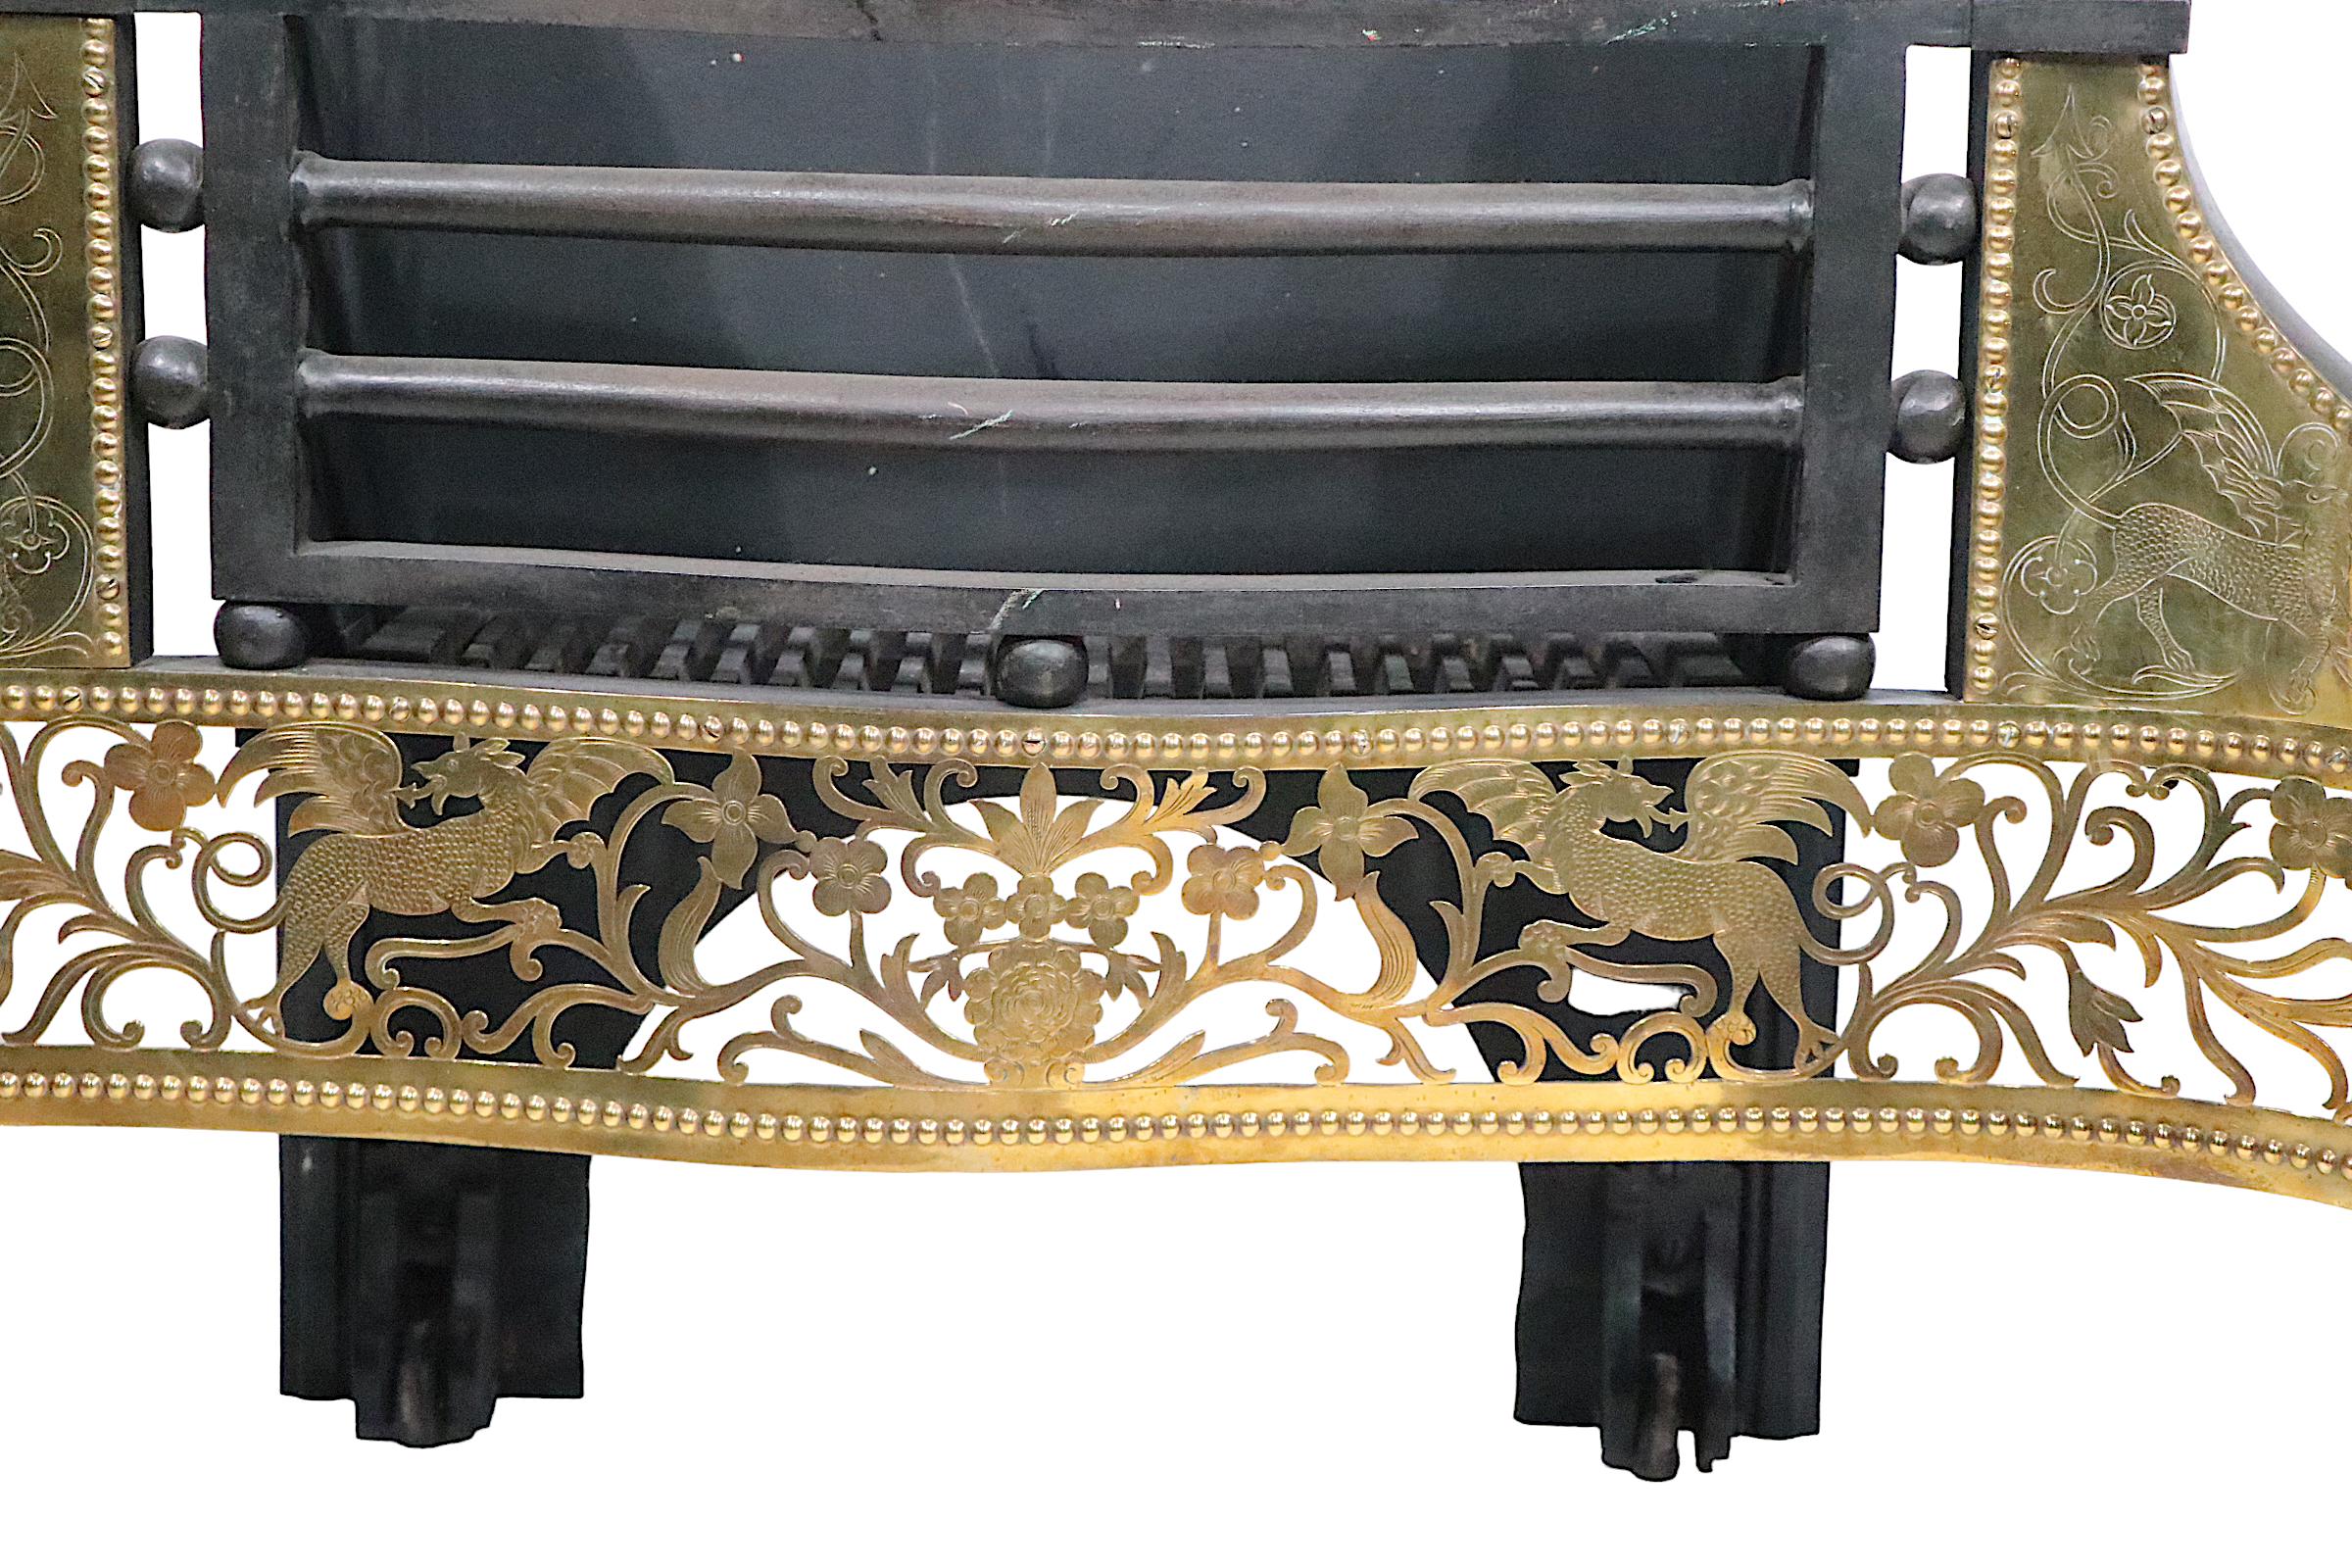 19th Century Classical Revival English Hoole Cast Iron and Brass Fireplace Coal Grate Insert 